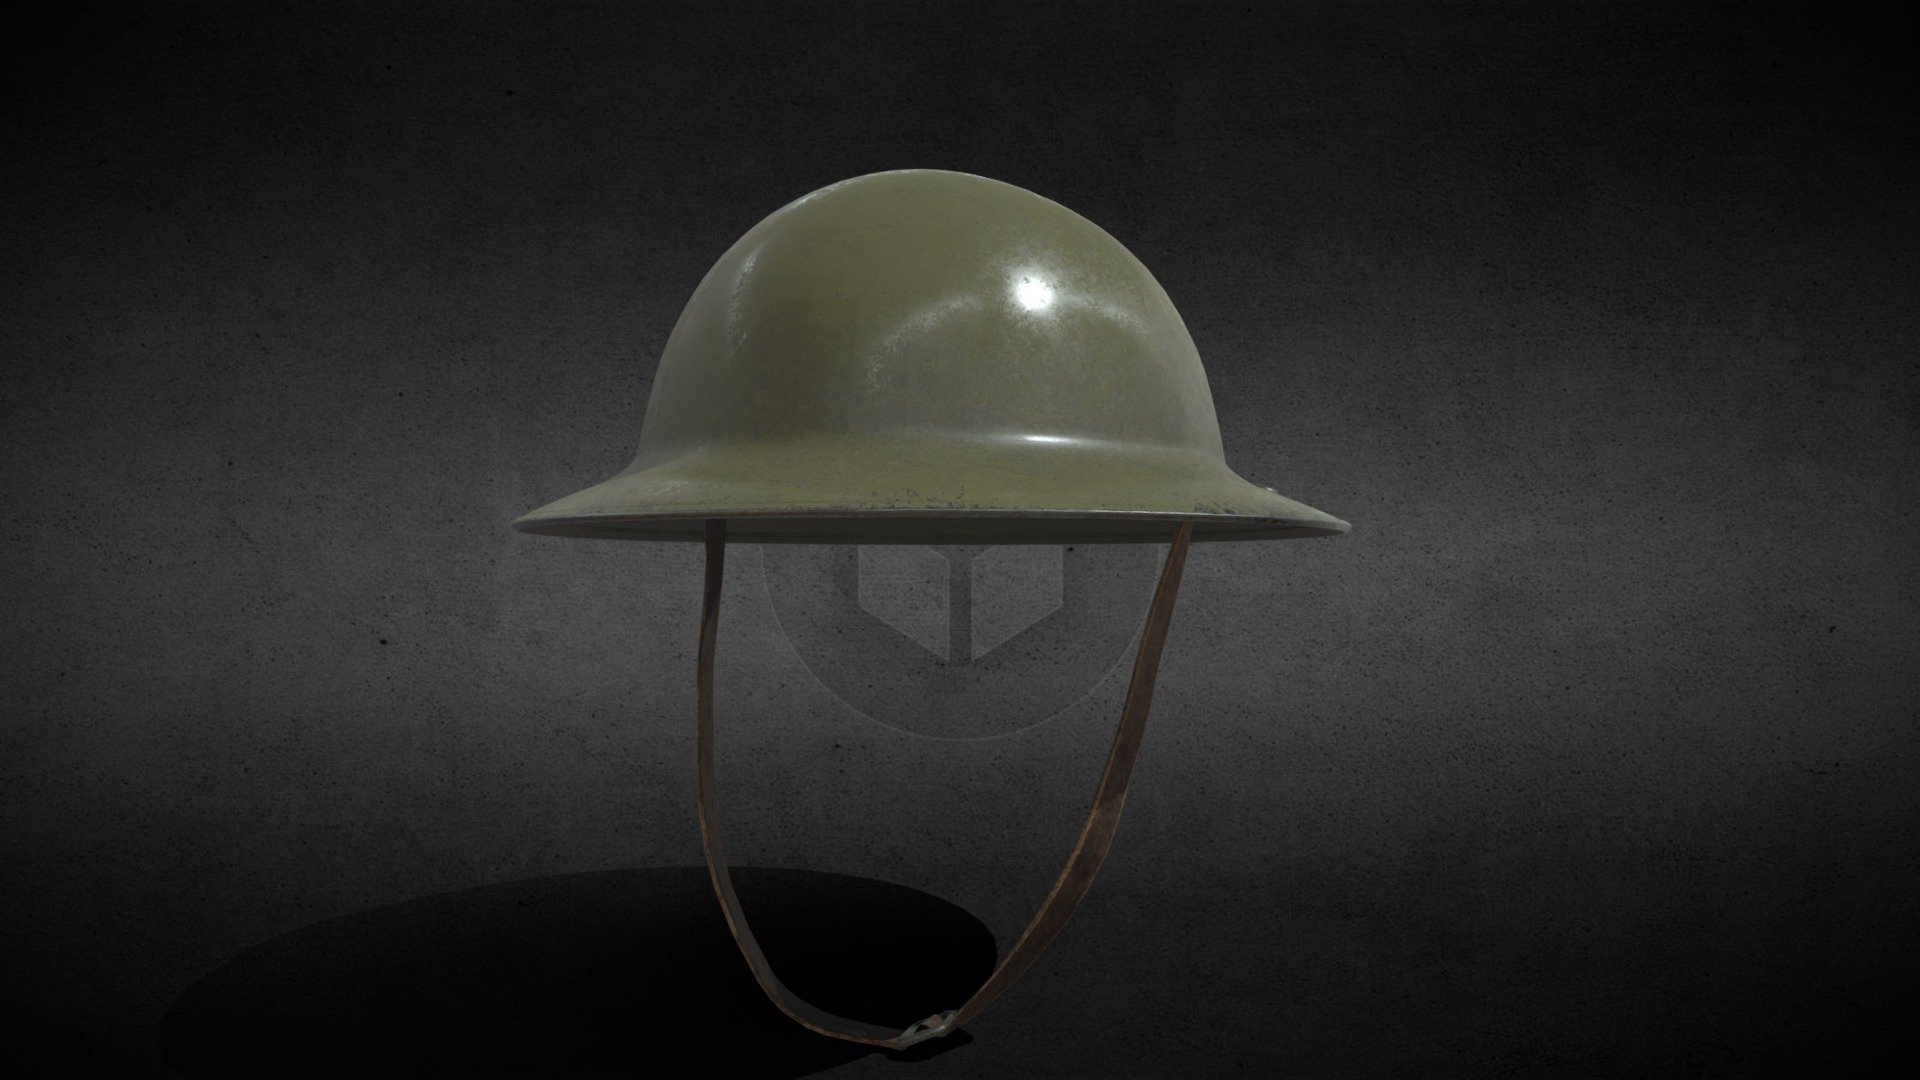 The Brodie helmet is a steel combat helmet designed and patented in London in 1915 by John Leopold Brodie. A modified form of it became the Helmet, Steel, Mark I in Britain and the M1917 Helmet in the US. Colloquially, it was called the shrapnel helmet, battle bowler, Tommy helmet, tin hat, and in the United States the doughboy helmet. It was also known as the dishpan hat, tin pan hat, washbasin, battle bowler (when worn by officers), and Kelly helmet. The German Army called it the Salatschüssel (salad bowl). The term Brodie is often misused. It is correctly applied only to the original 1915 Brodie's Steel Helmet, War Office Pattern 3d model